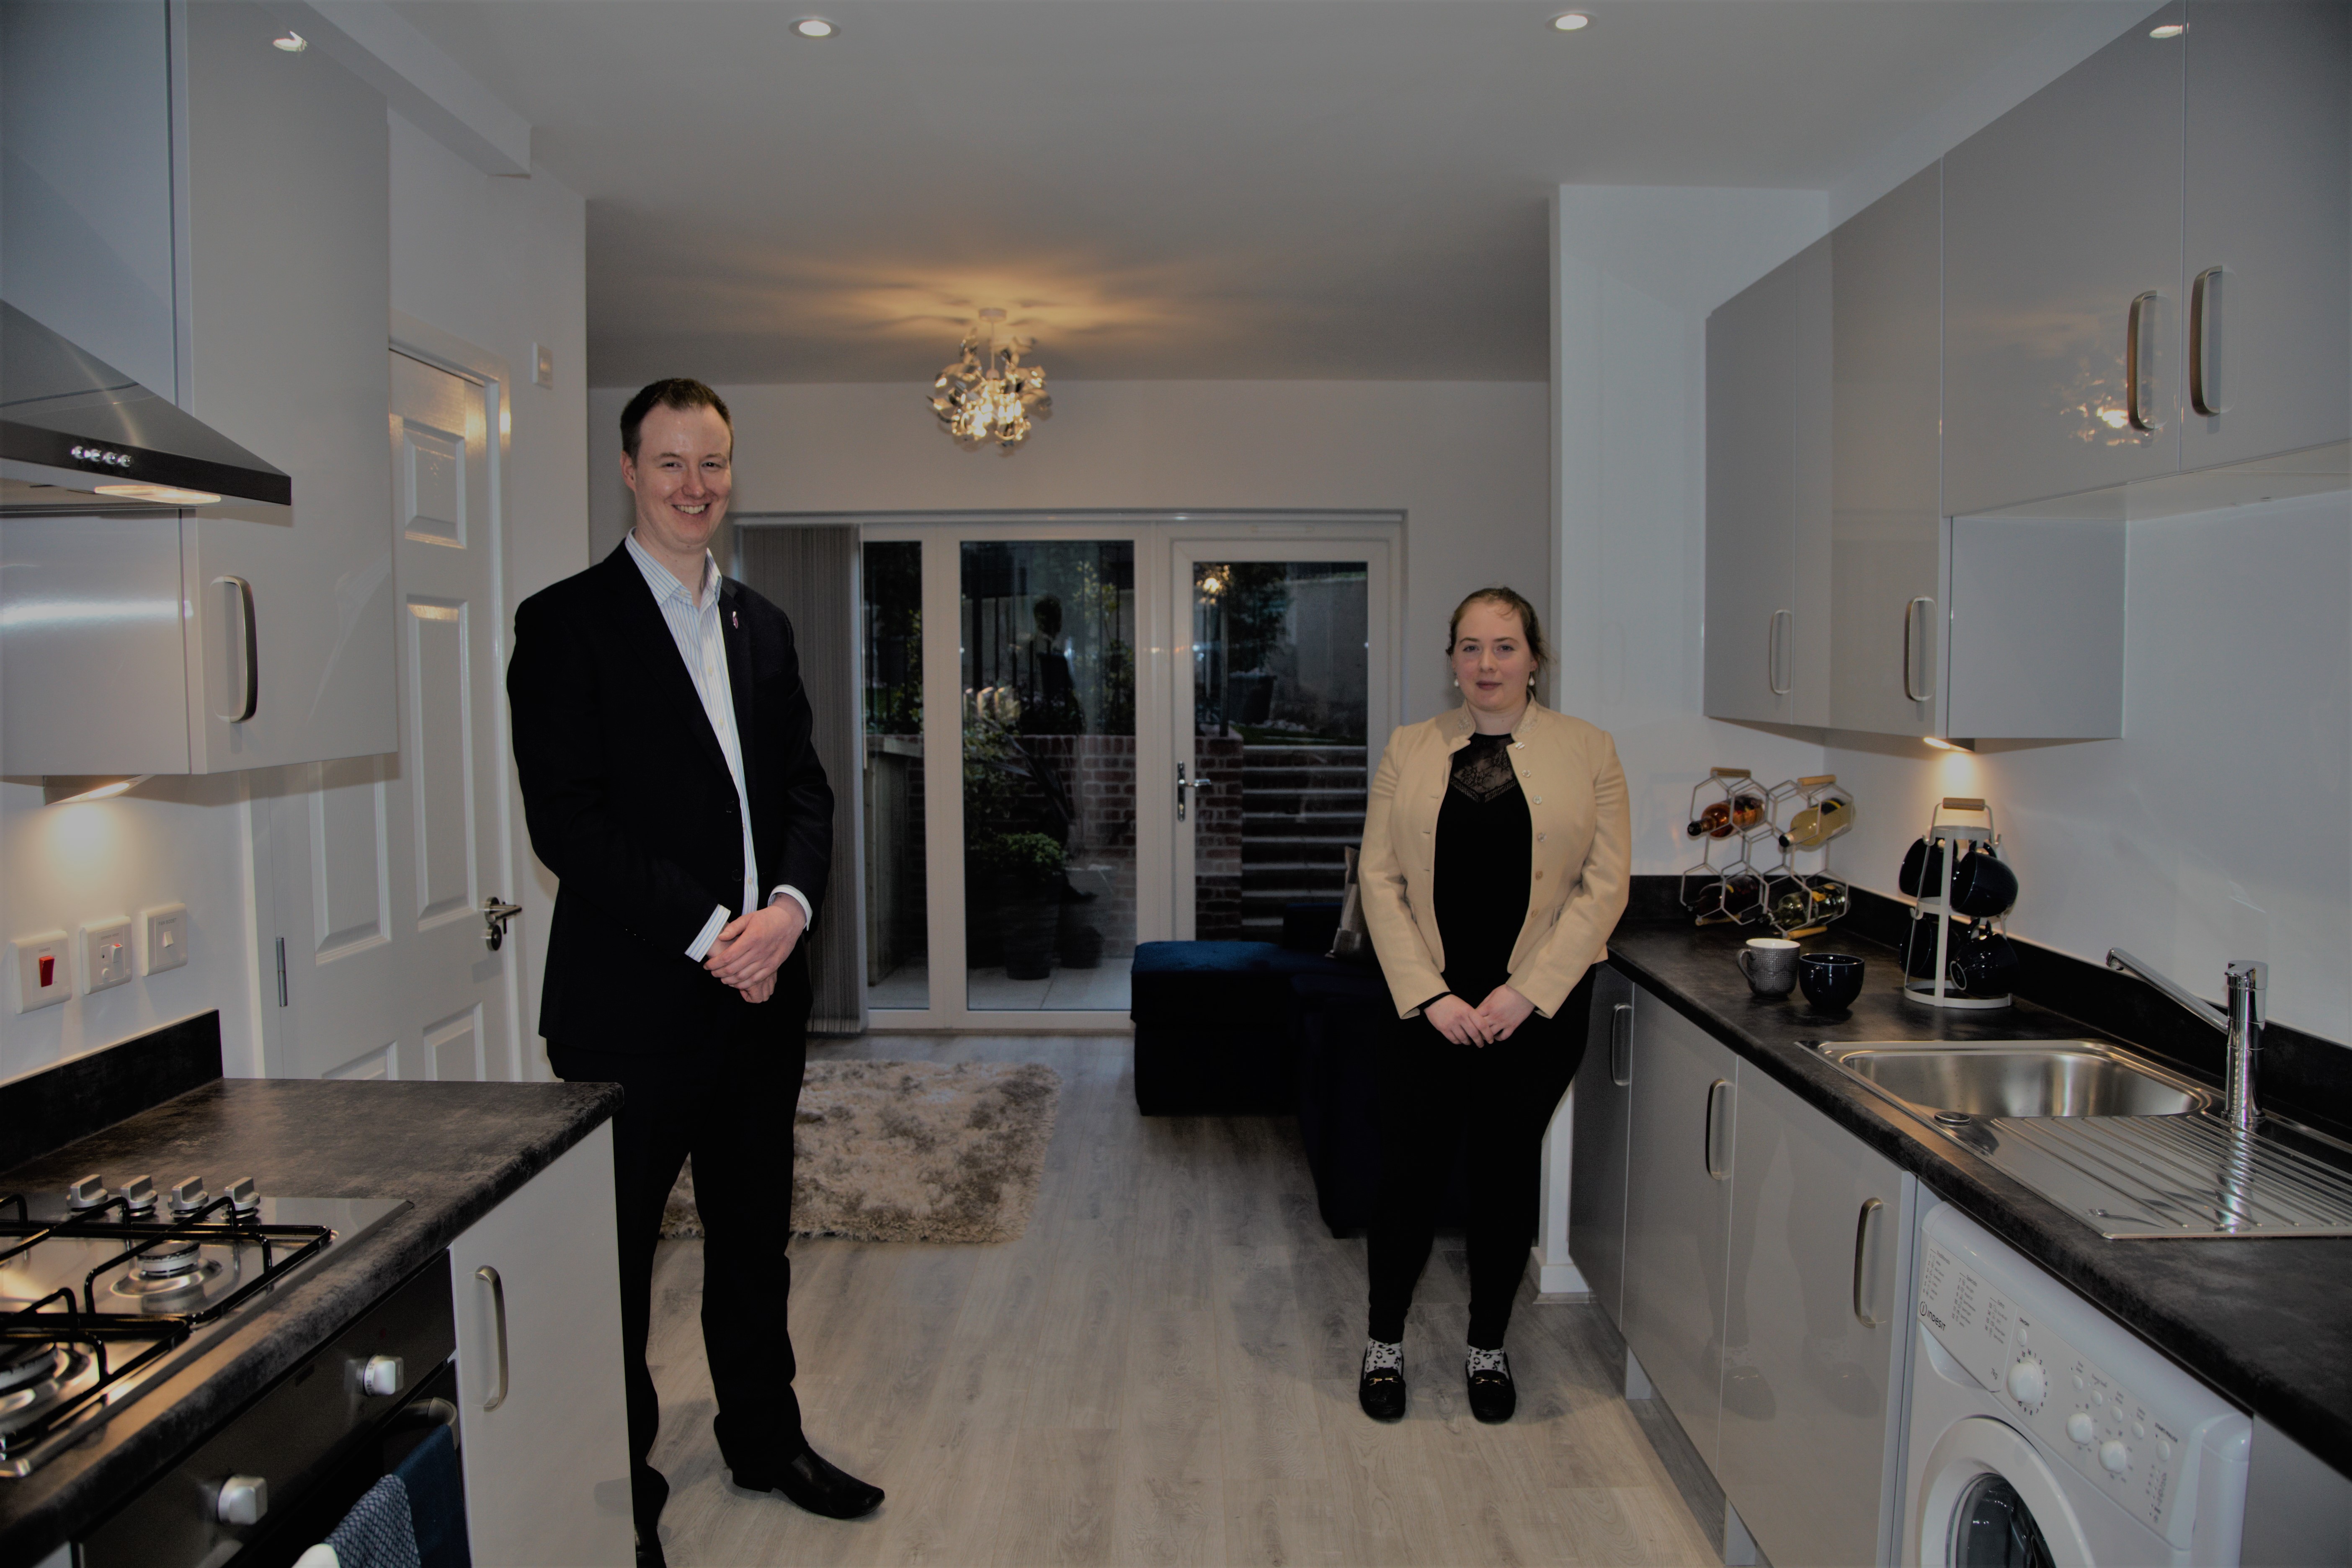 New show home opens at Wellgate Place